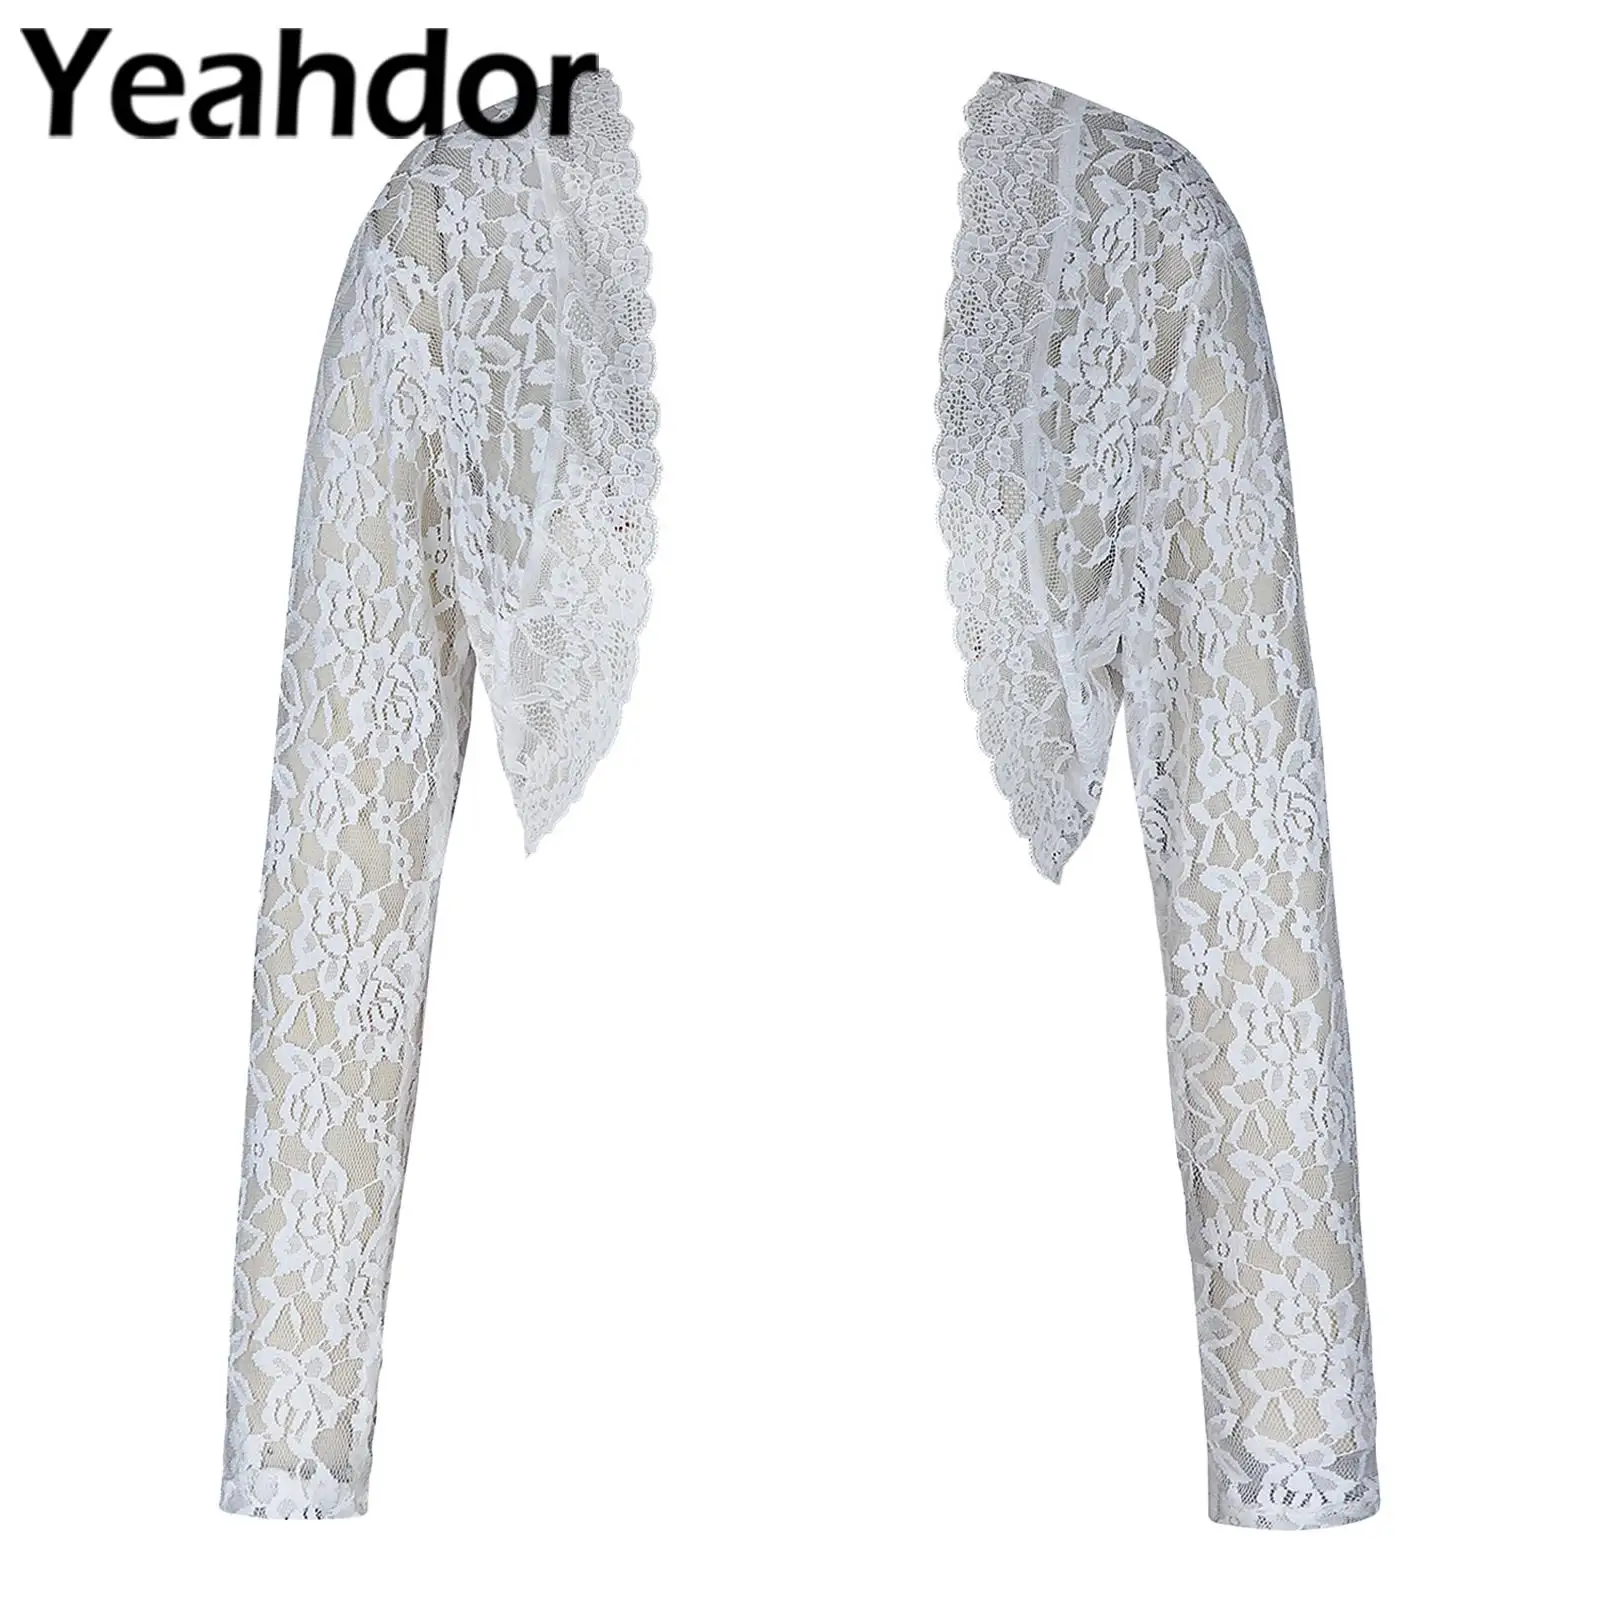 

Elegant Womens Shawl Wraps See Through Floral Lace Shrug Bolero Long Sleeve Open Front Cardigan for Party Dress Accessories